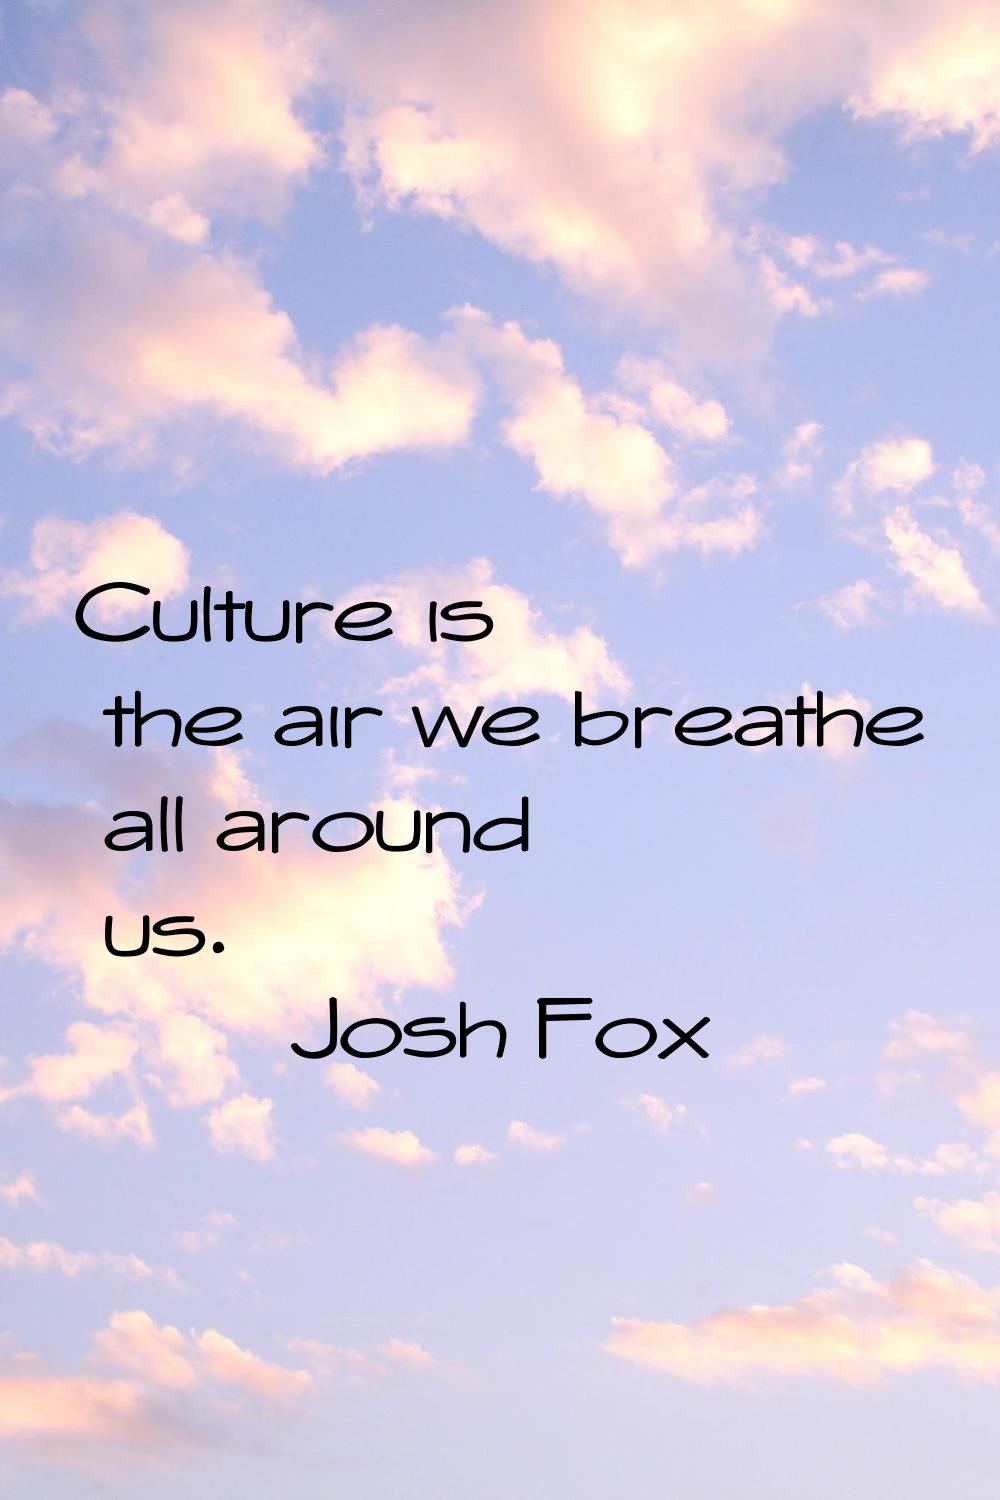 Culture is the air we breathe all around us.